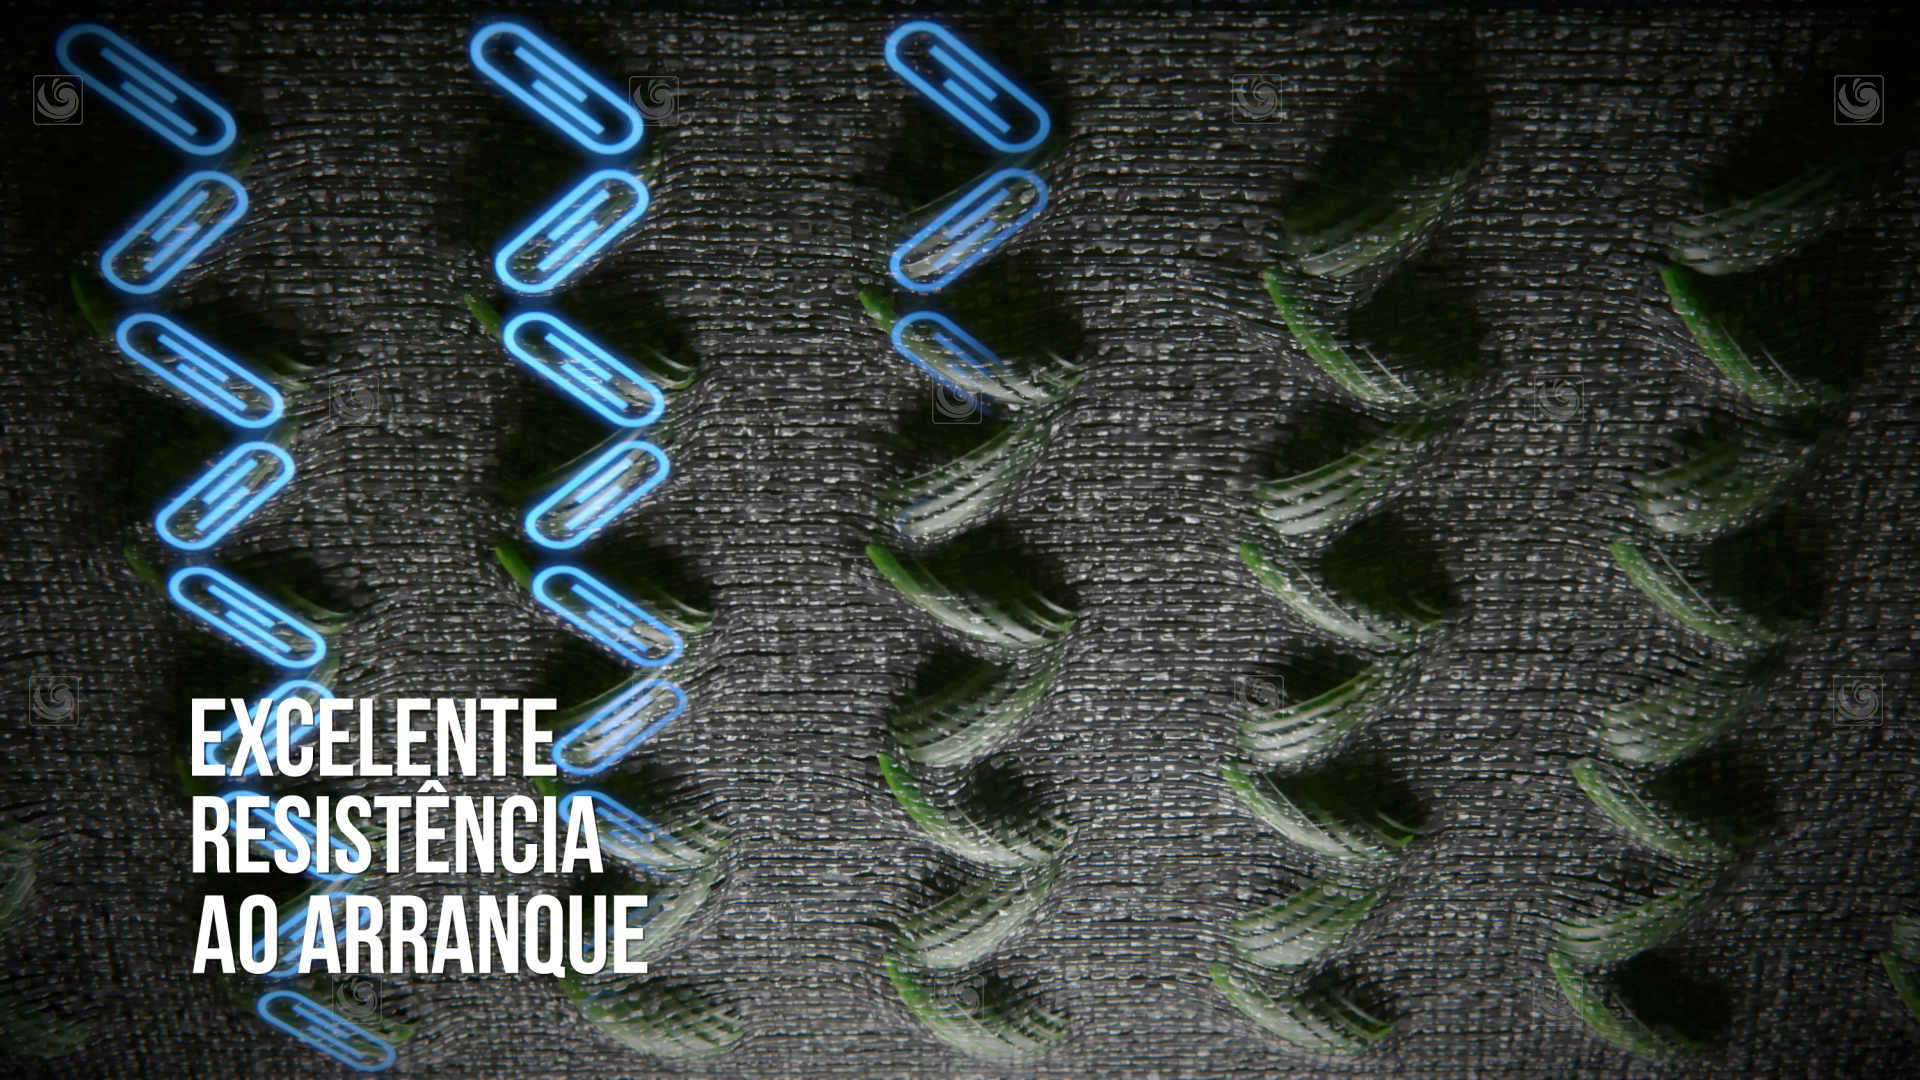 3D animation frame showing the detail of the stitching of the fibers of an artificial turf